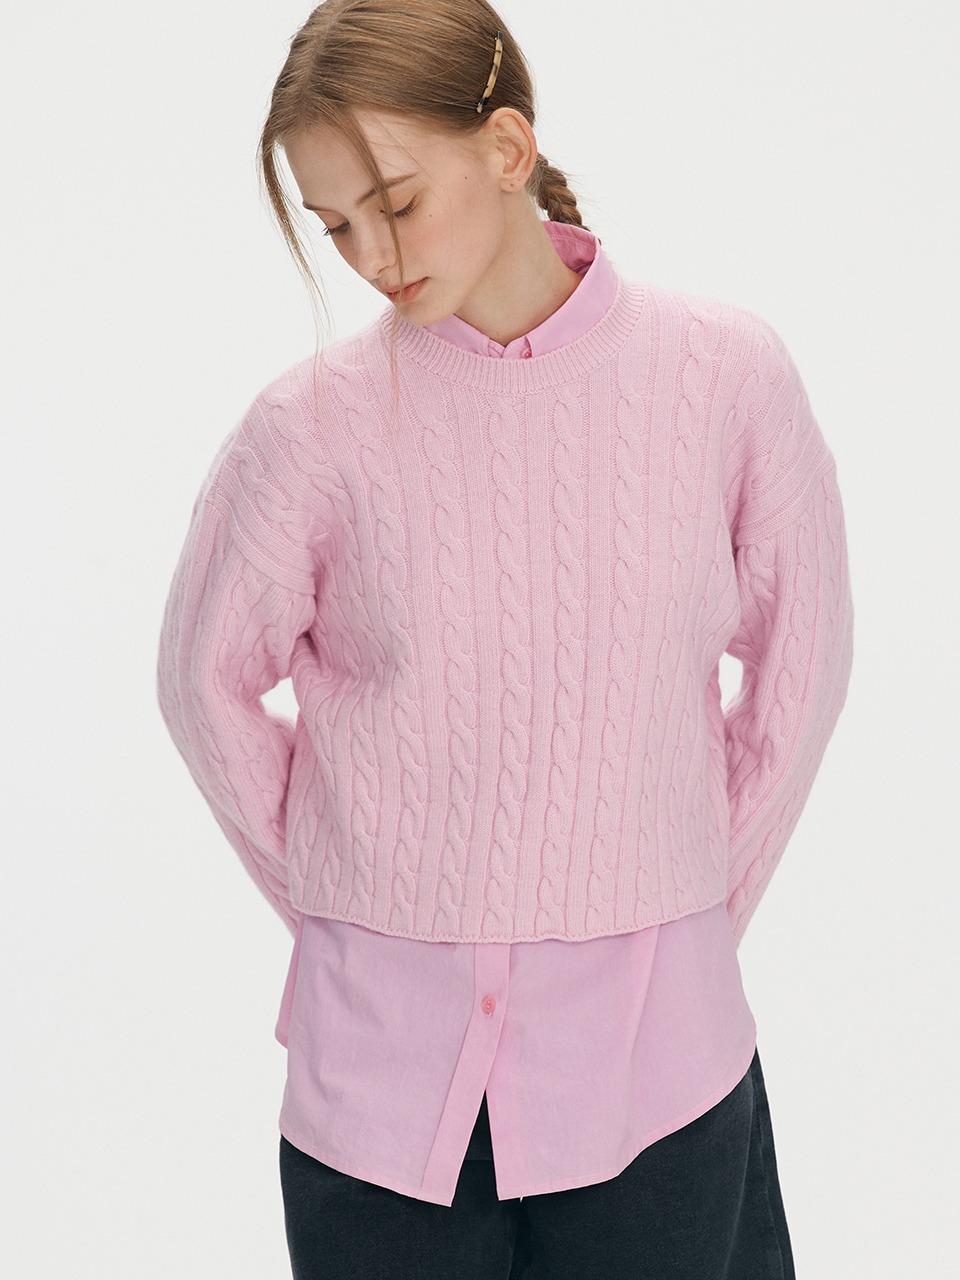 Back point cable knit - Baby pink